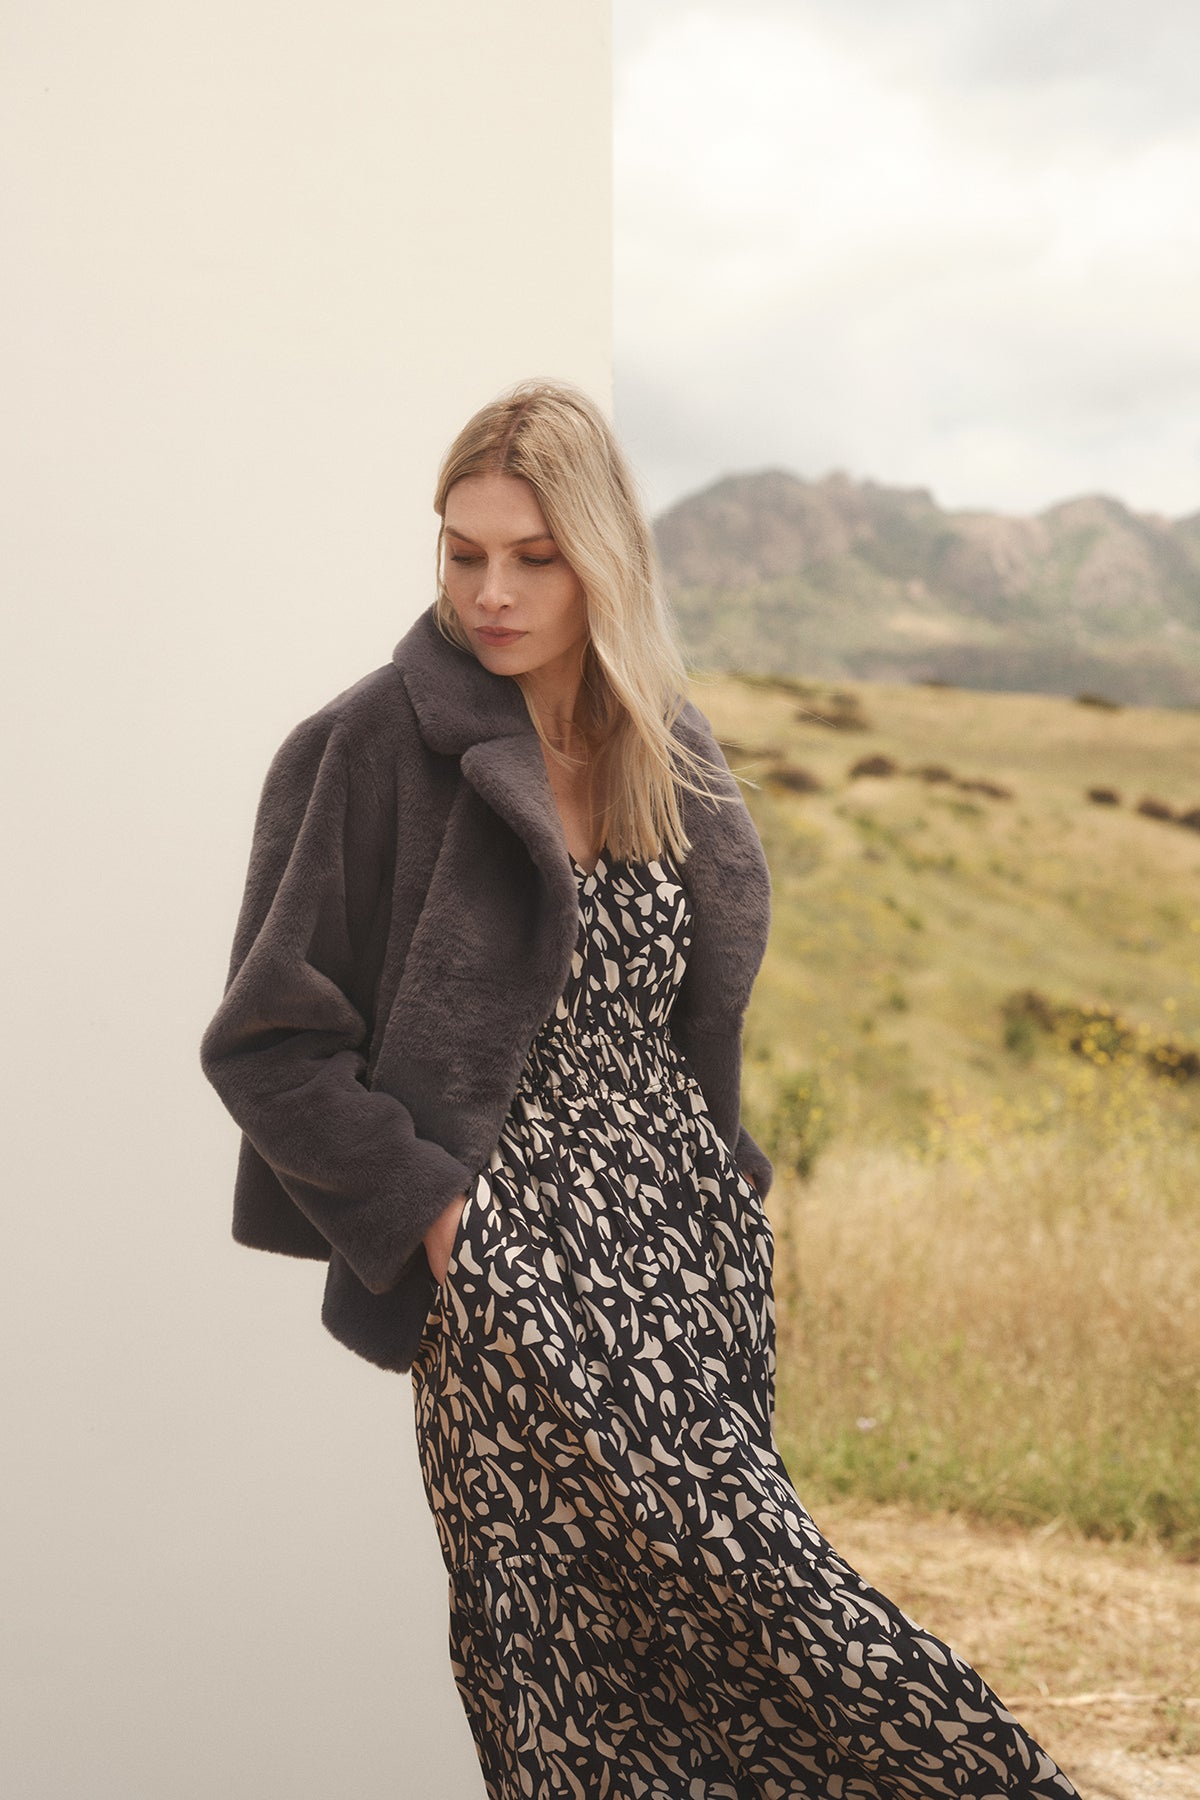   A woman in a LYUDA PRINTED SATIN MIDI DRESS by Velvet by Graham & Spencer with a v-neckline and a grey faux fur jacket. 